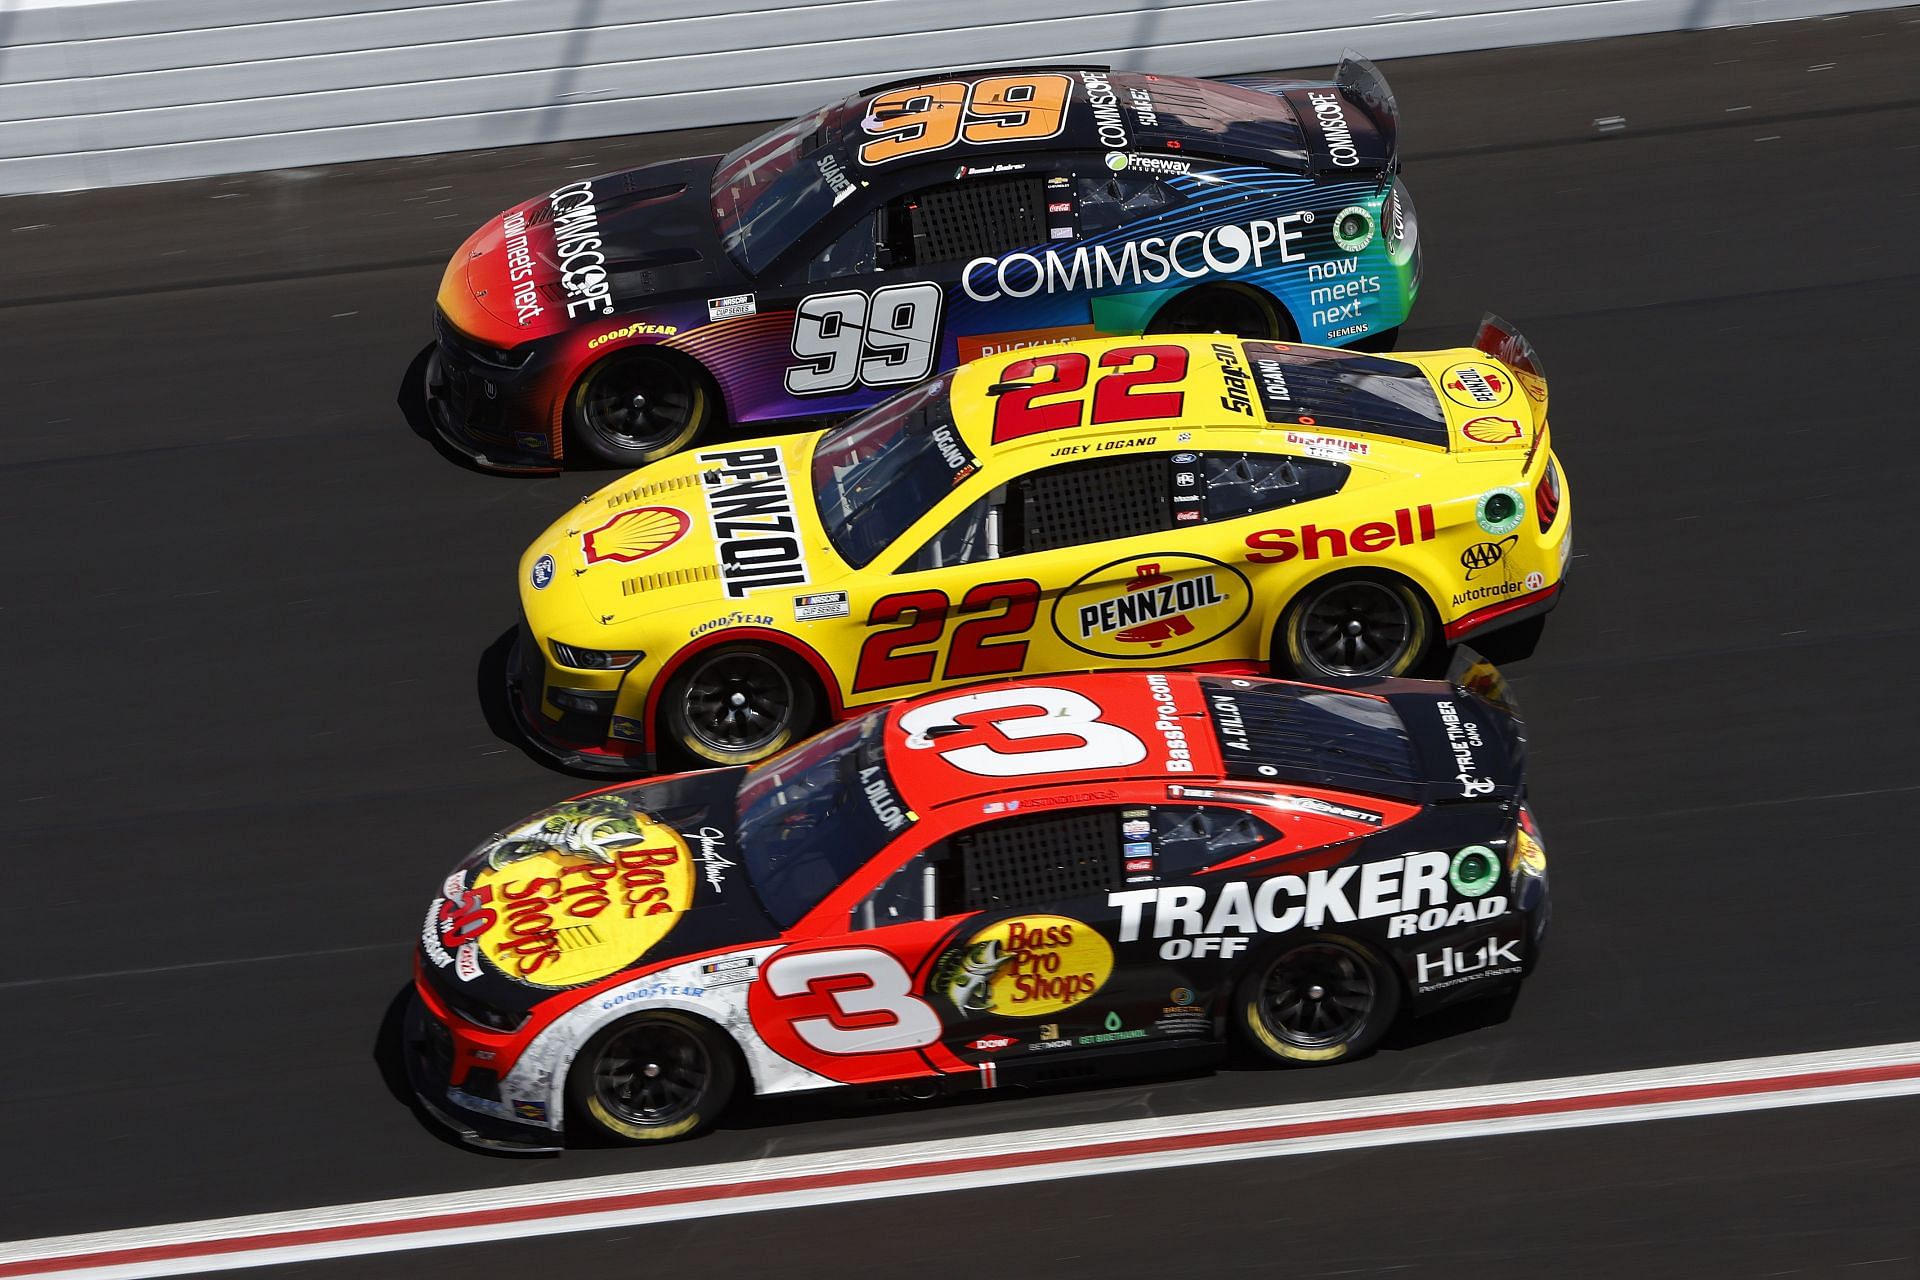 Joey Logano&#039;s No. 22 Shell Pennzoil Ford surrounded by Daniel Suarez in the No. 99 CommScope Chevrolet and Austin Dillon in the No. 3 Bass Pro Shops/Tracker Off Road Chevrolet. (Photo by Sean Gardner/Getty Images)